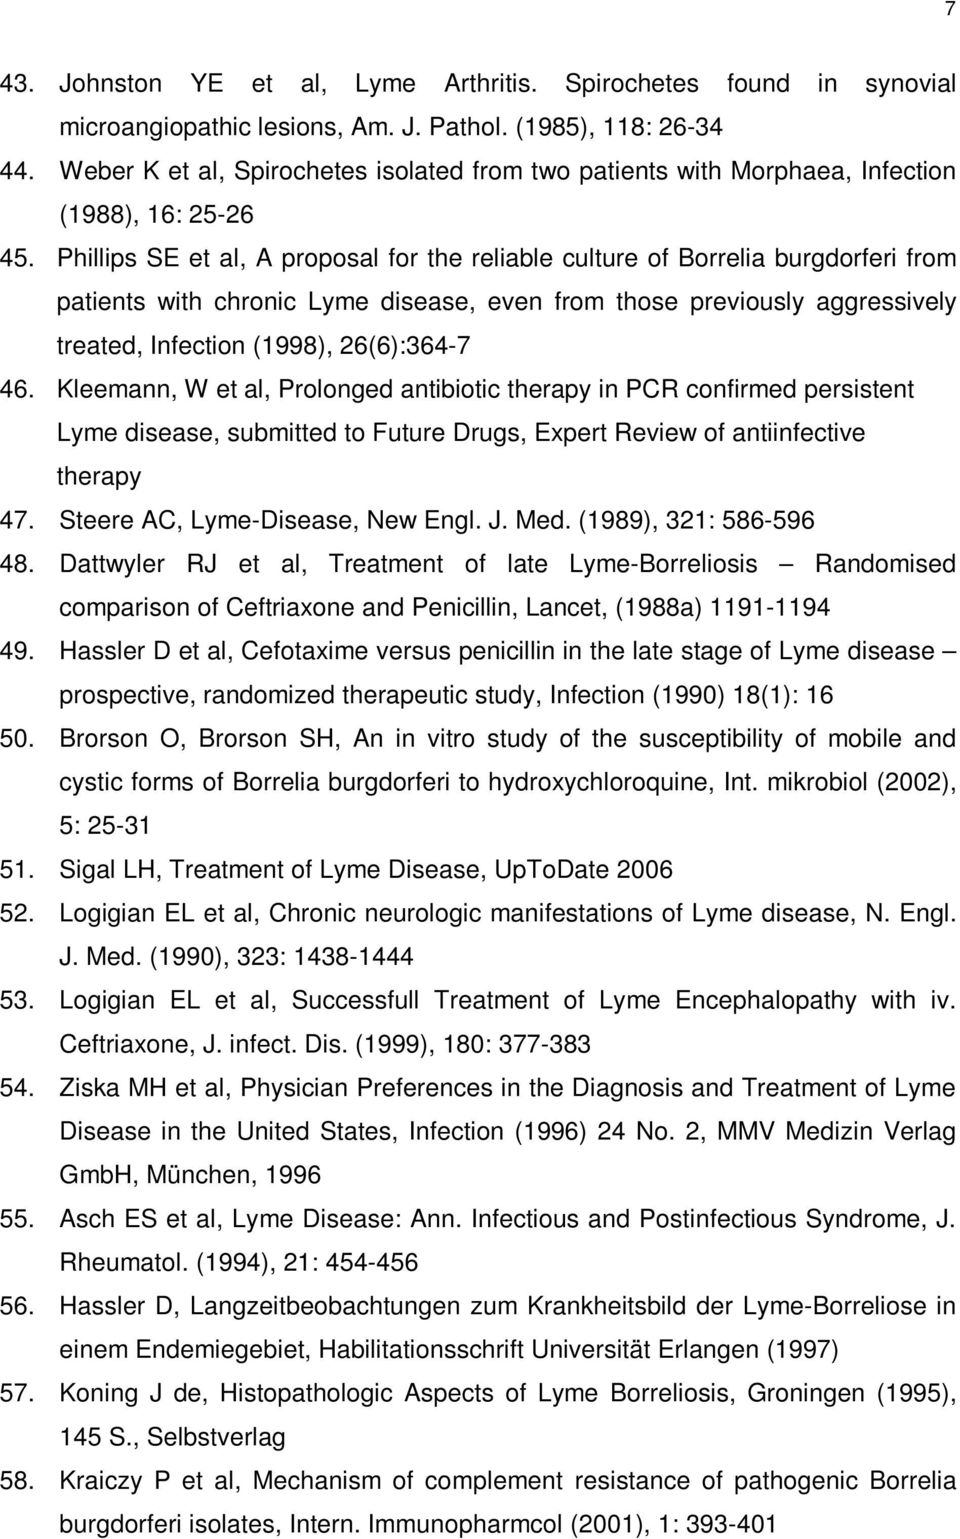 Phillips SE et al, A proposal for the reliable culture of Borrelia burgdorferi from patients with chronic Lyme disease, even from those previously aggressively treated, Infection (1998), 26(6):364-7